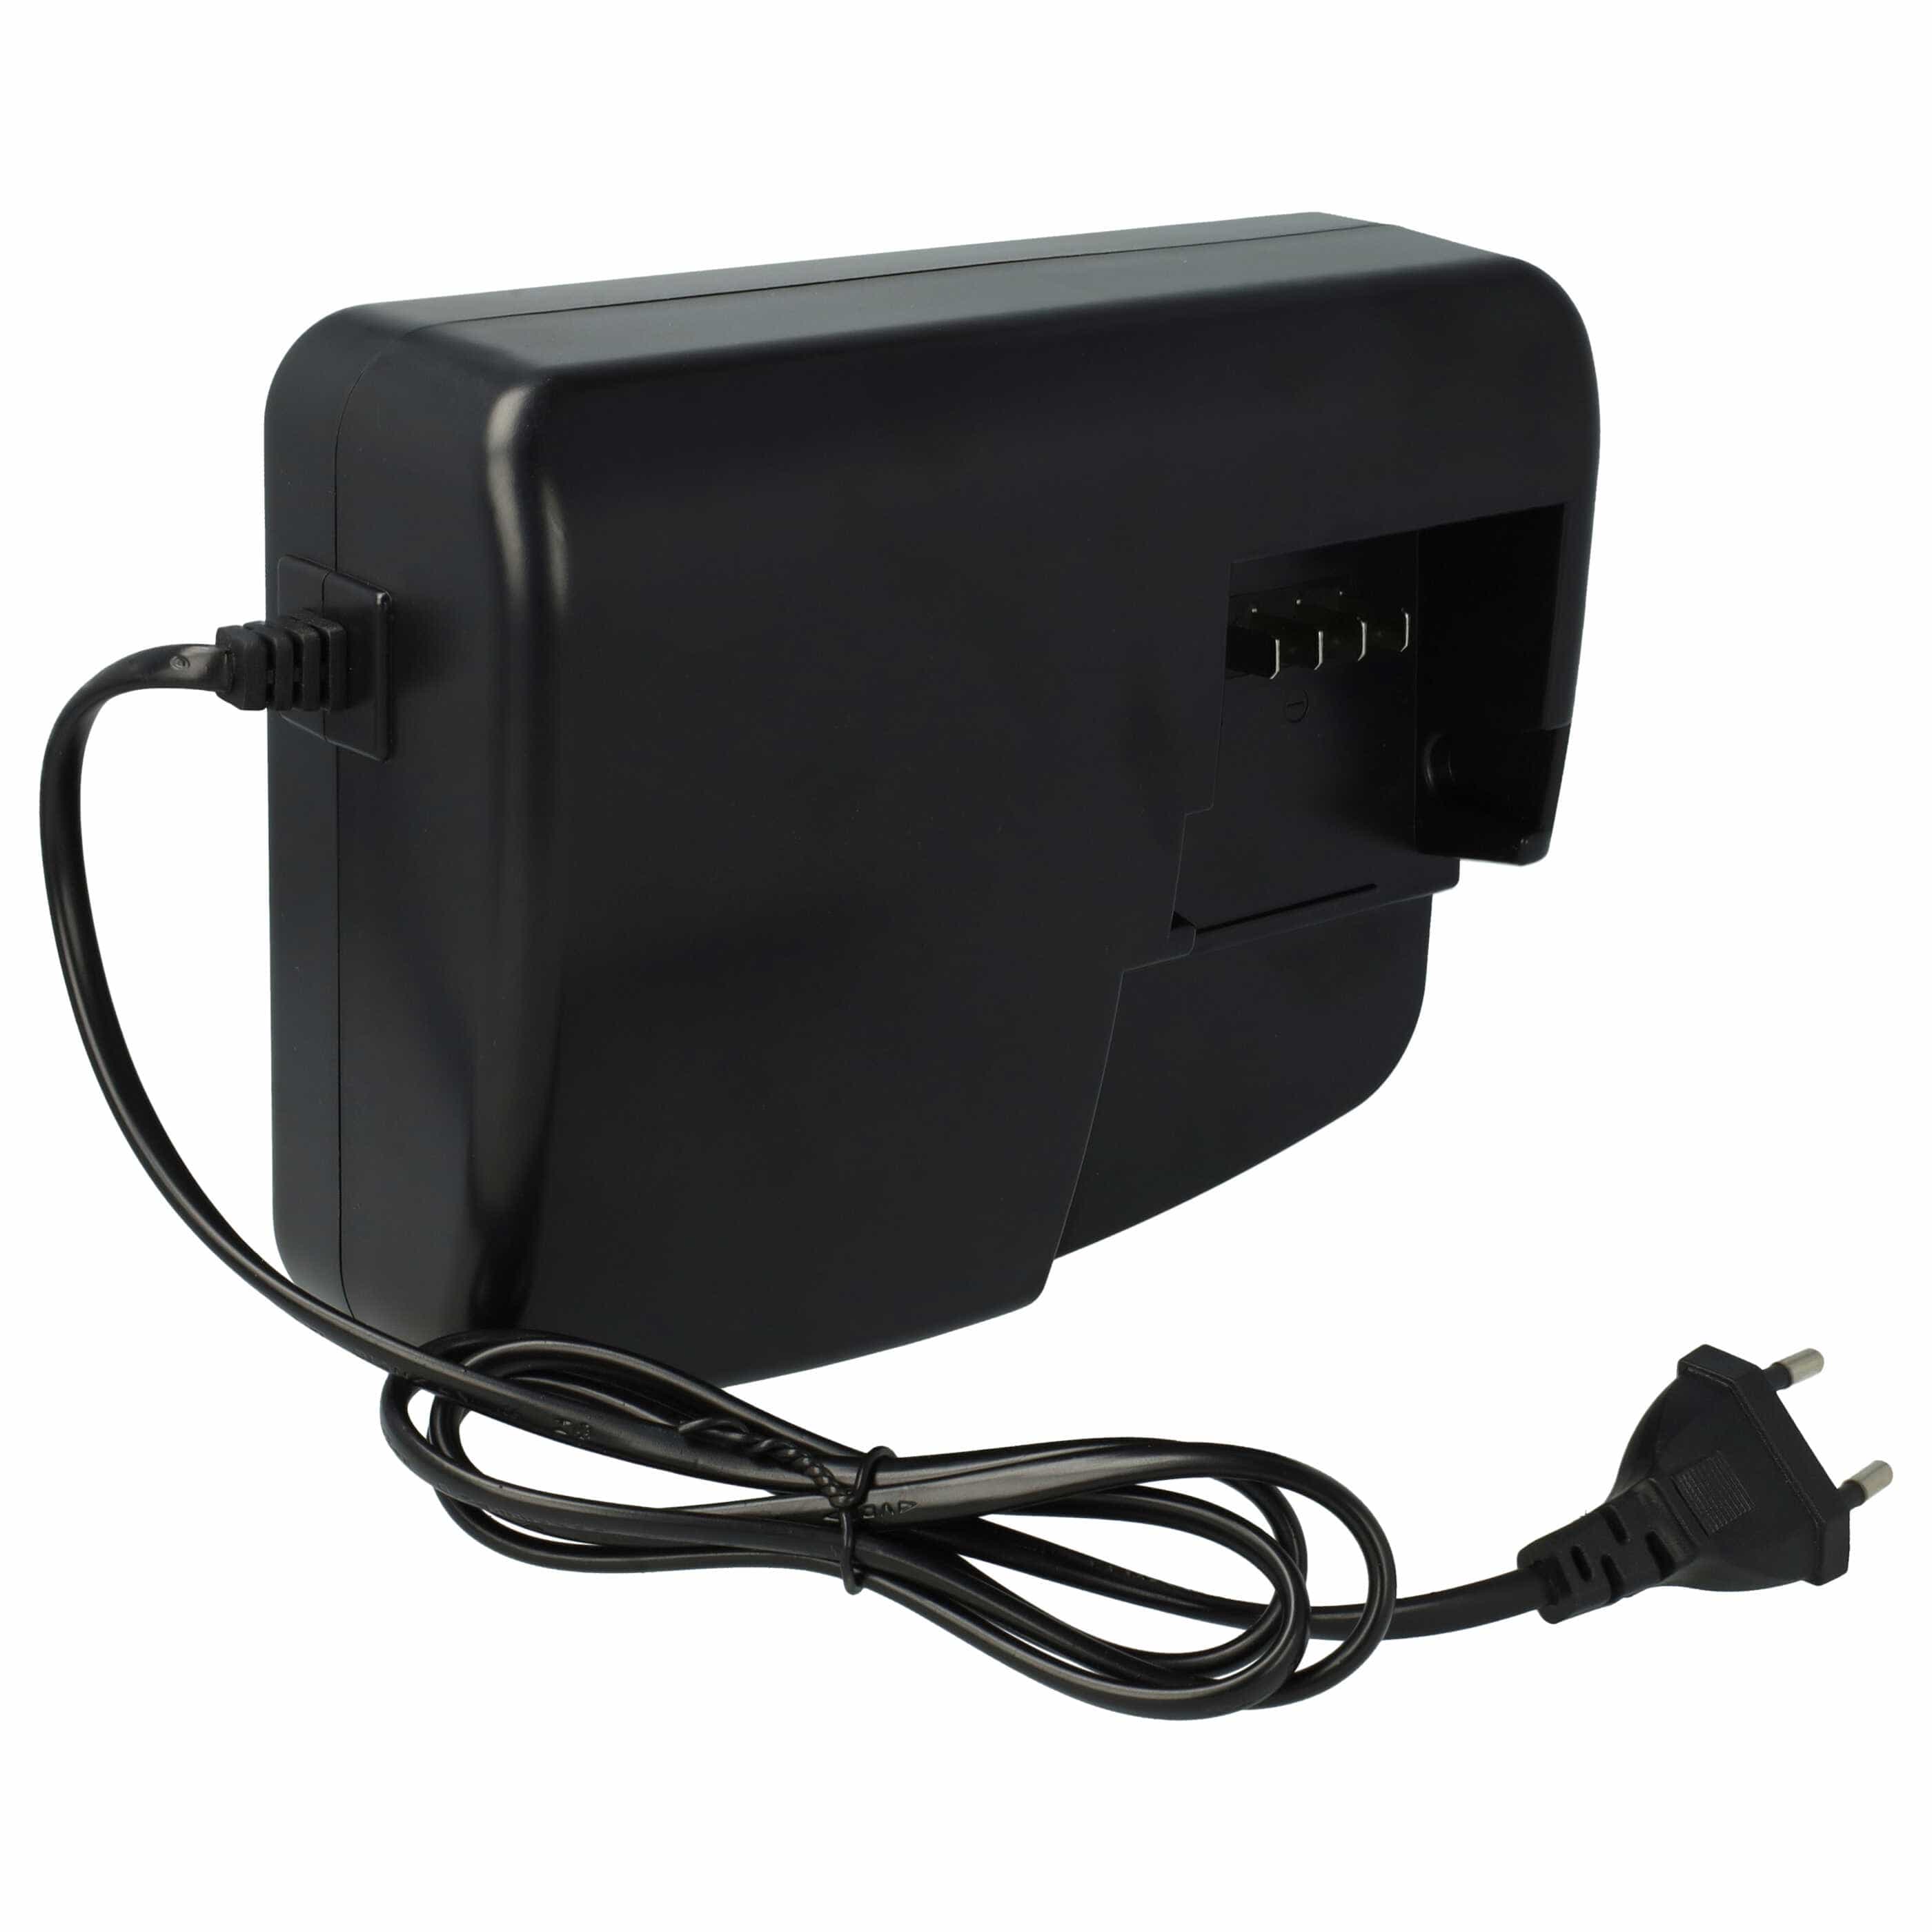 Charger suitable for Gazelle E-Bike Battery etc. - 4.0 A